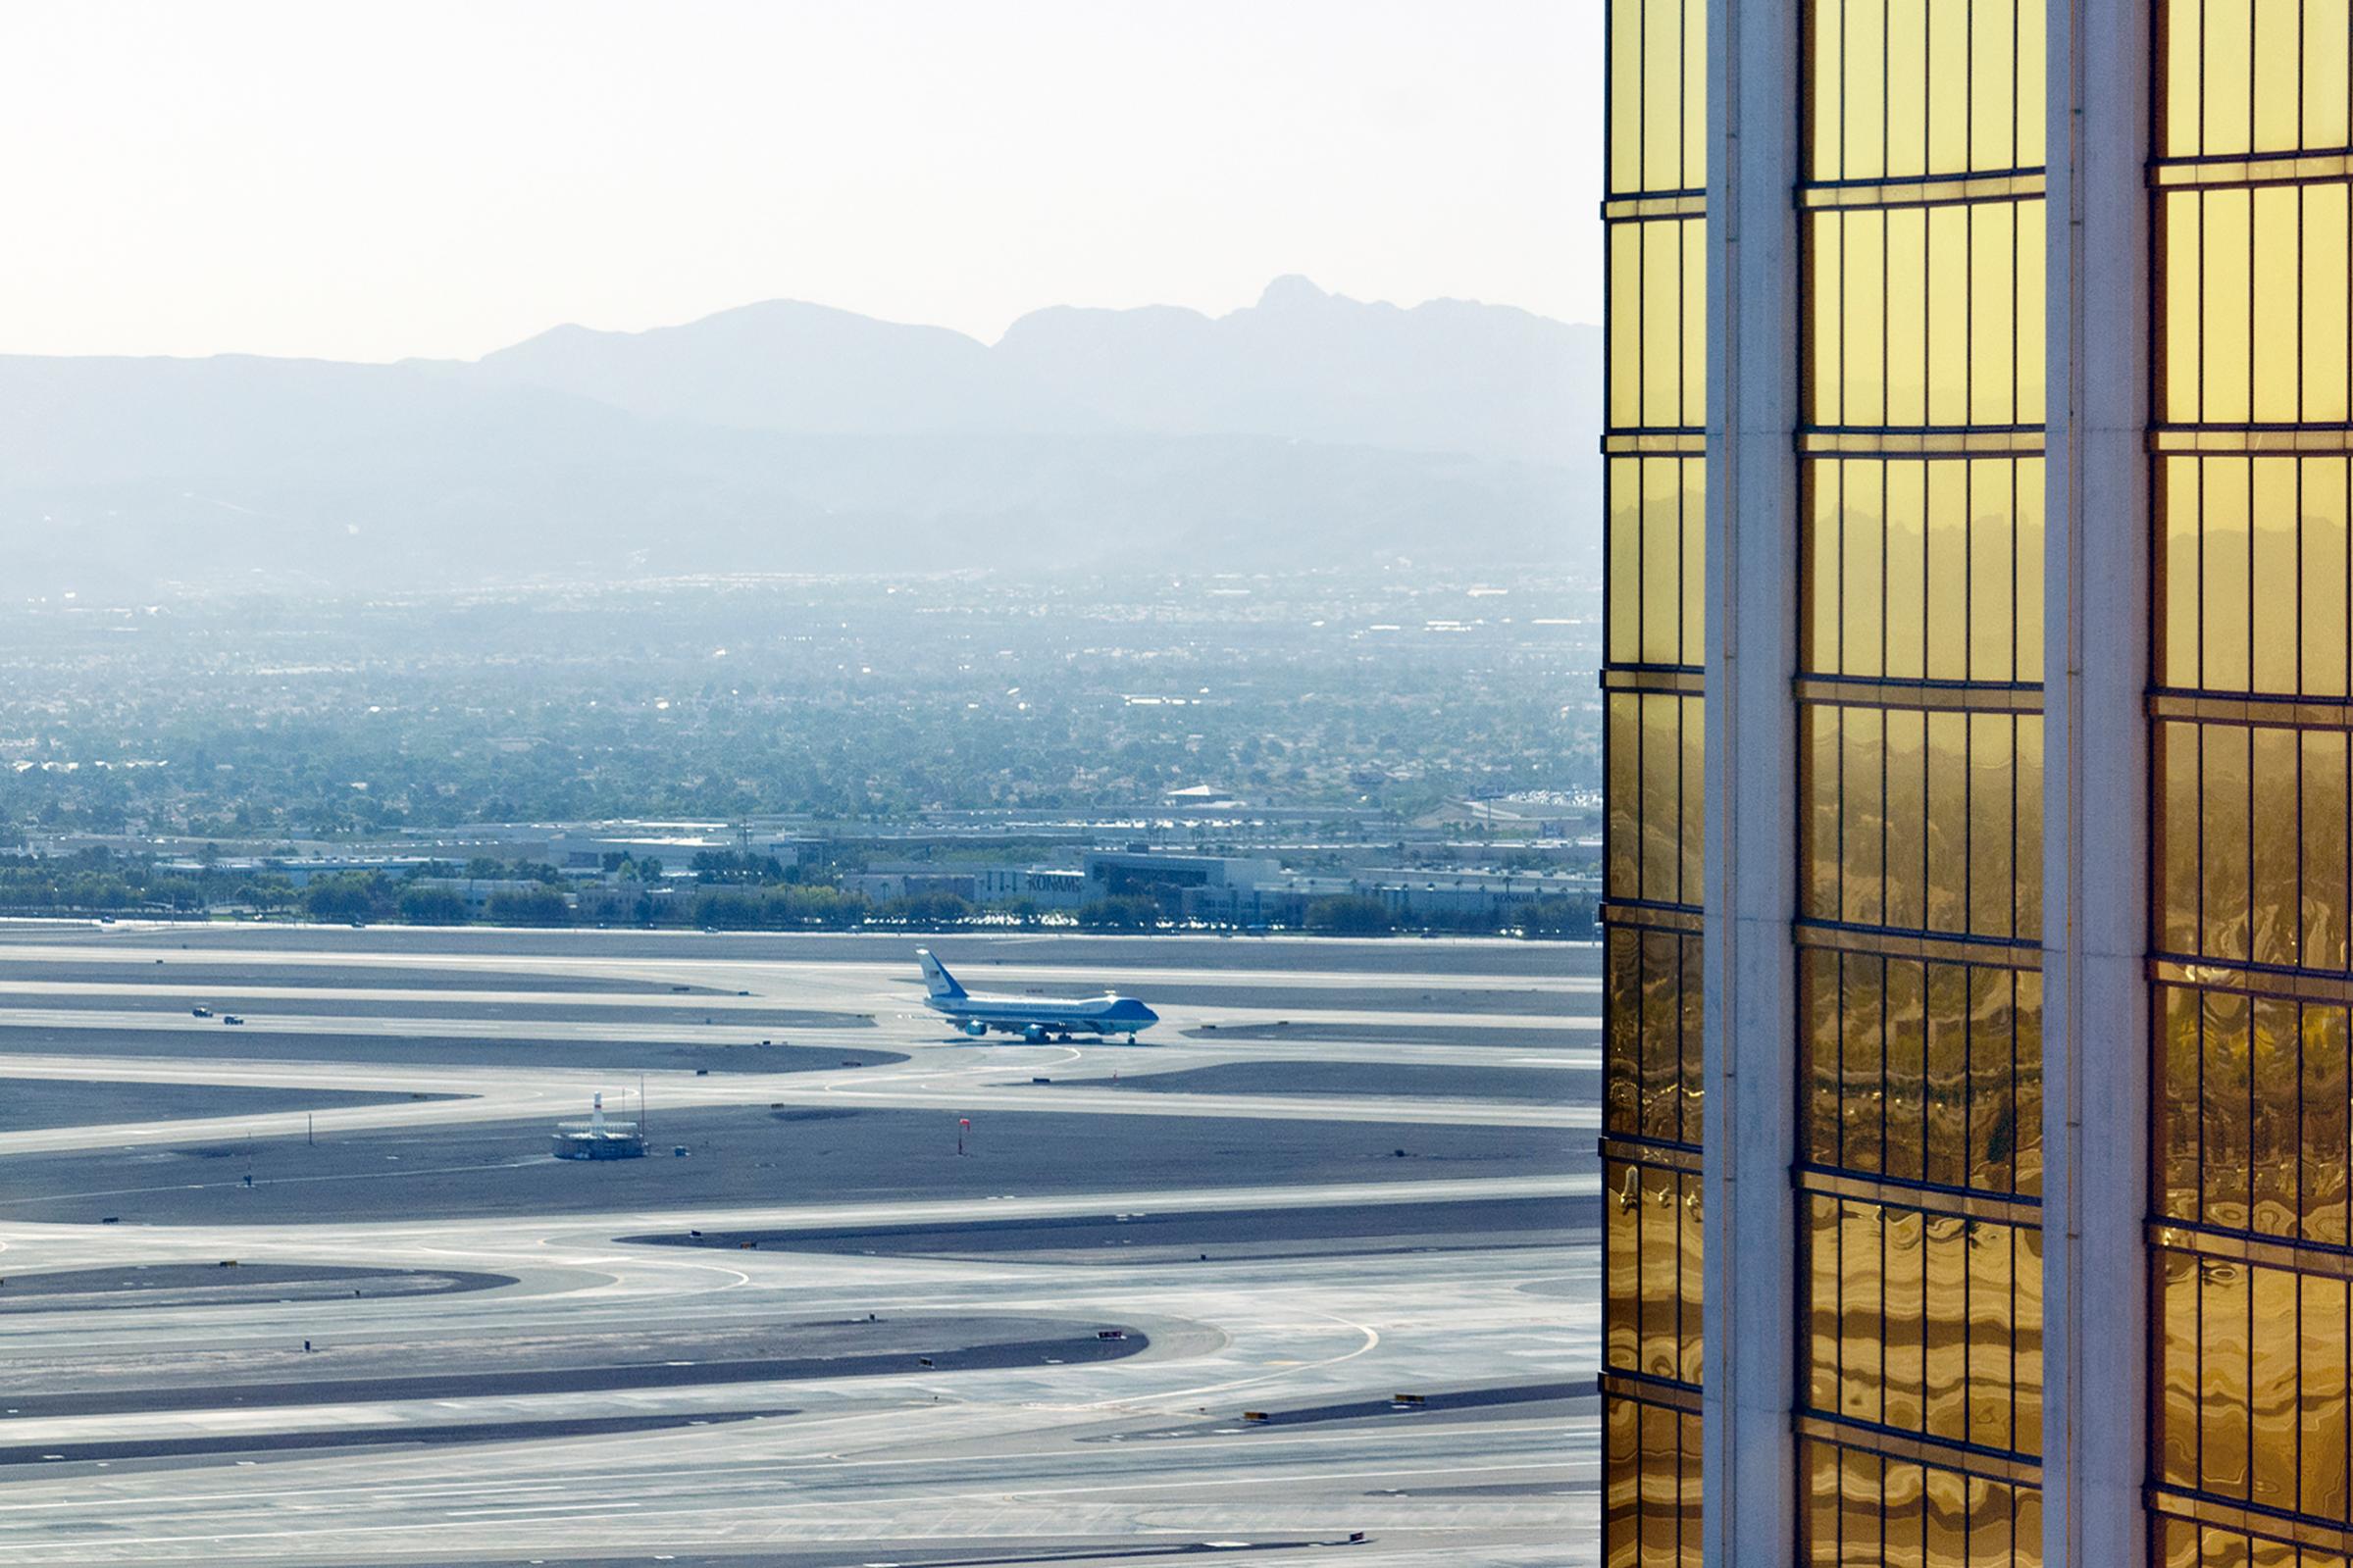 President Trump arrives on Air Force One at McCarran International Airport, Las Vegas. Oct. 4, 2017. The Mandalay Bay Resort and Casino is seen on the right.